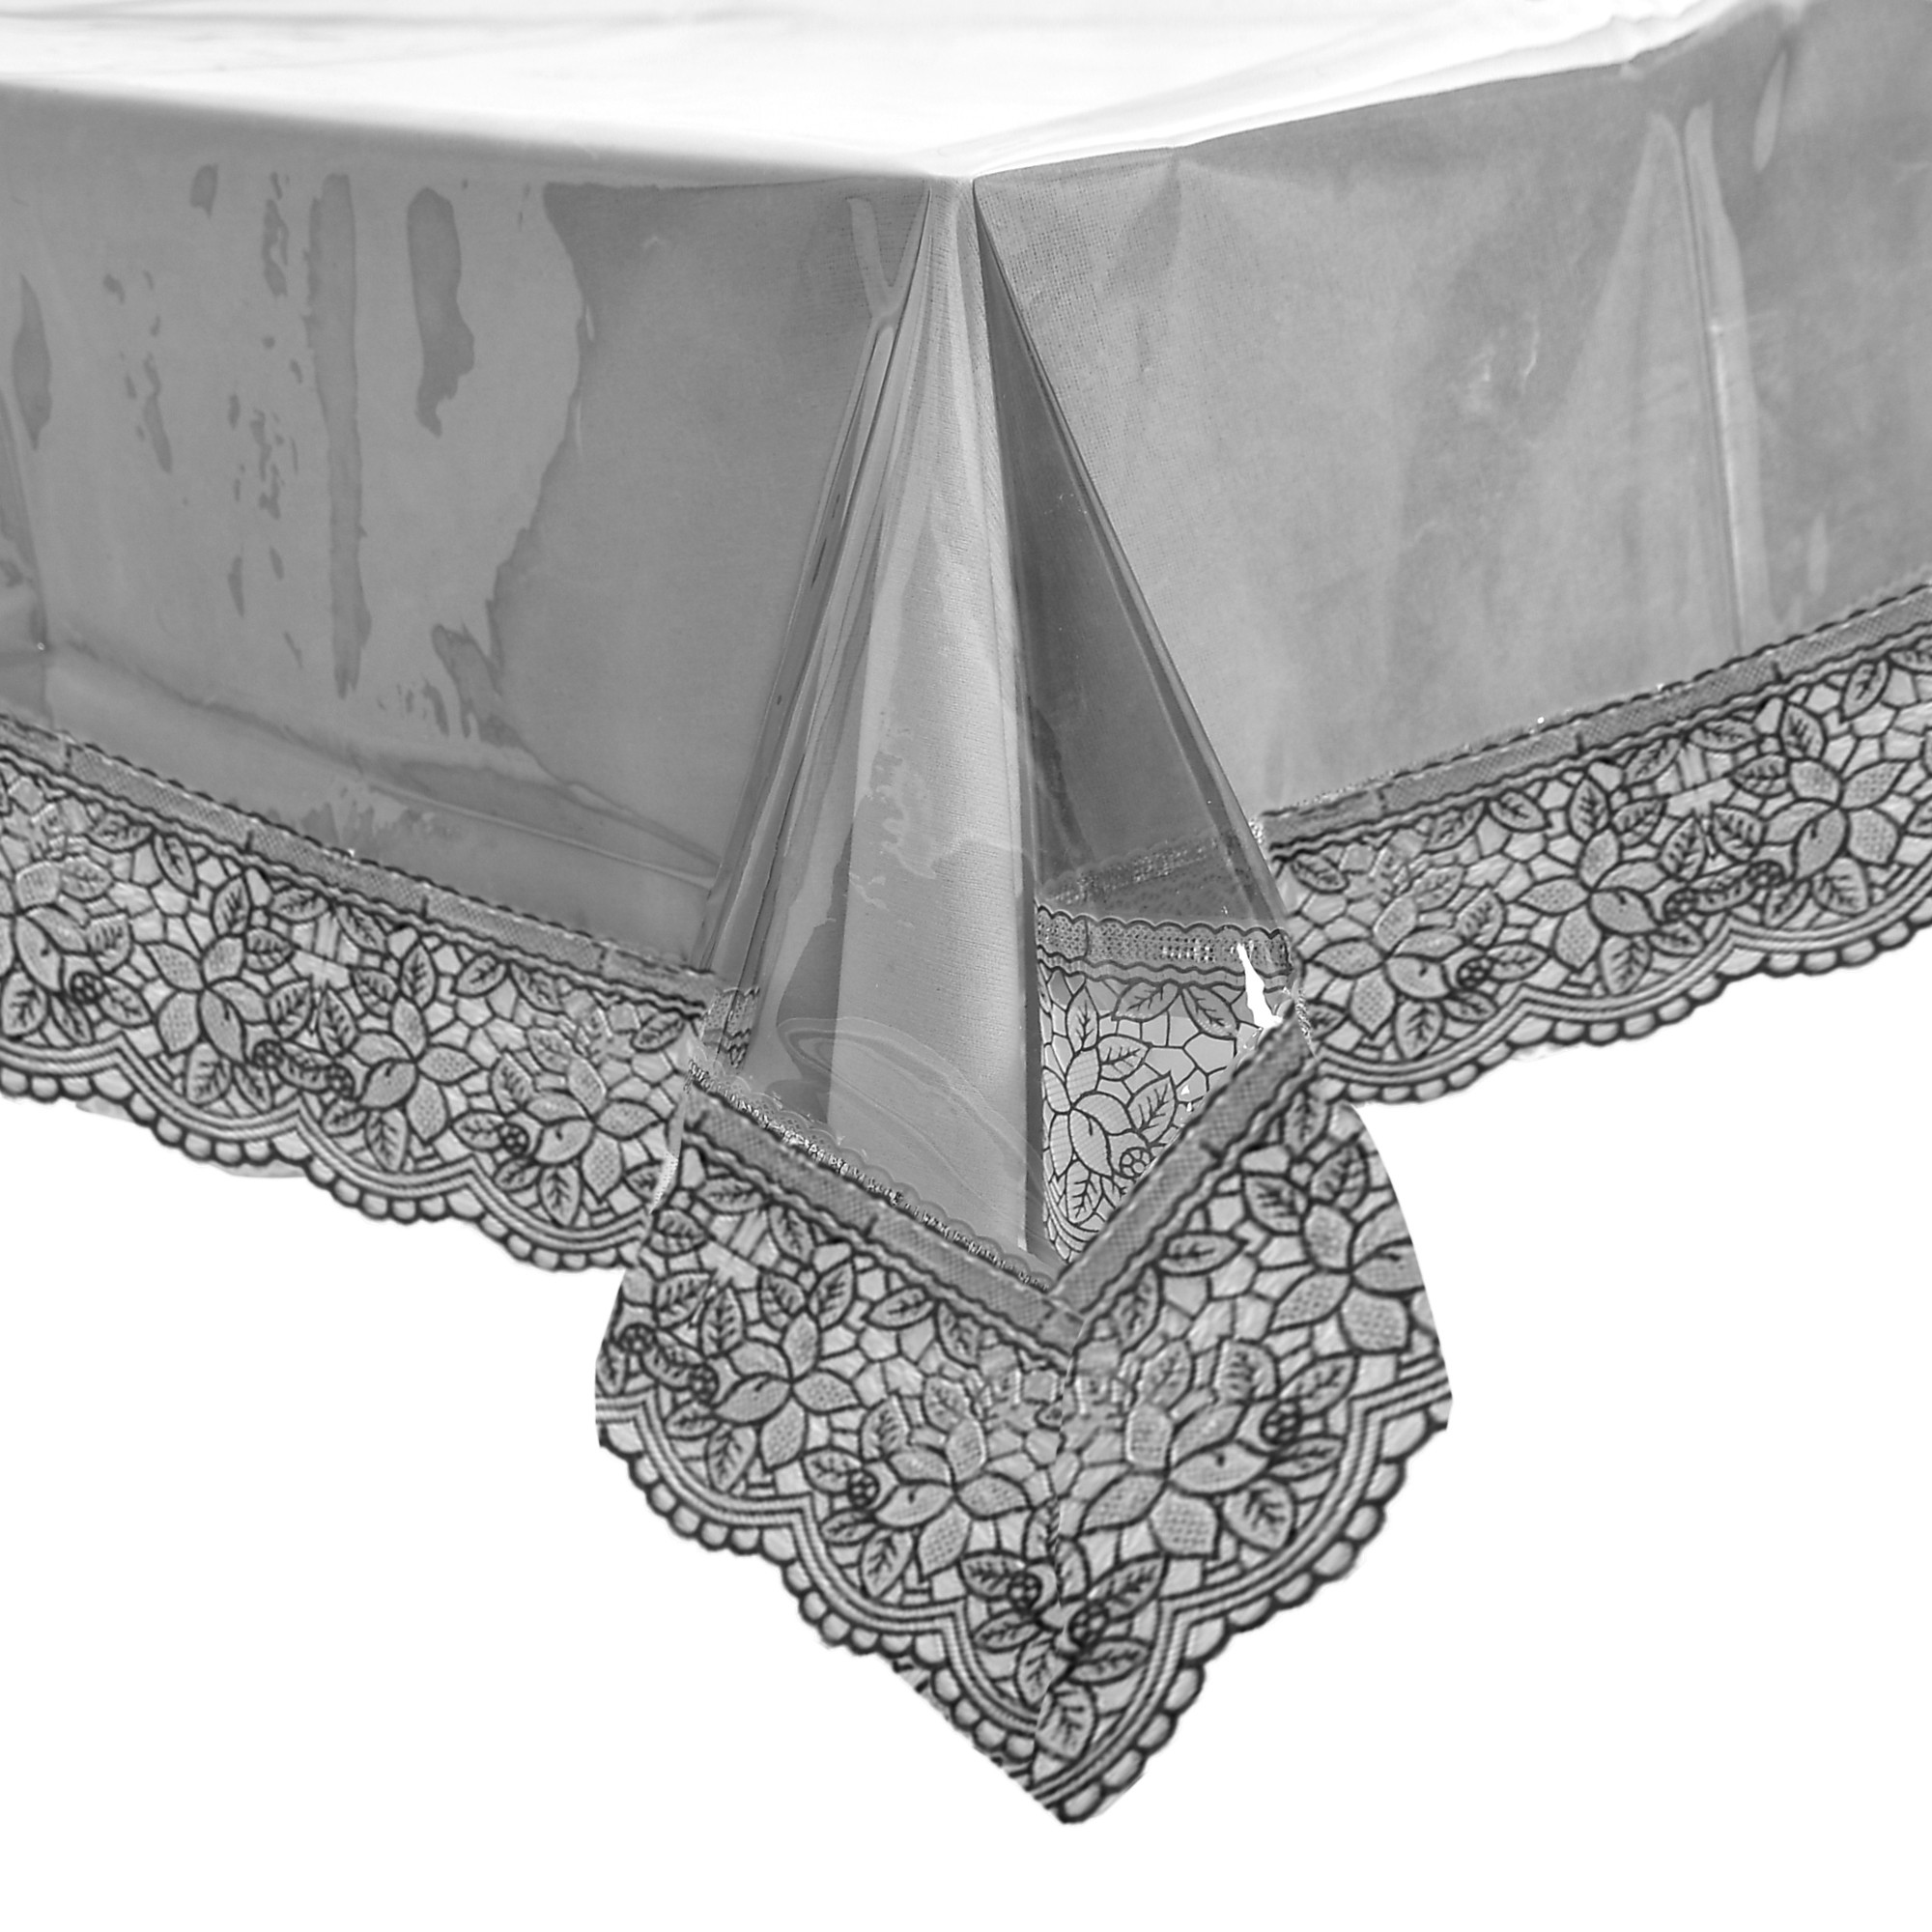 Kuber Industries PVC 4 Seater Center Table Cover With Silver Lace Border 40